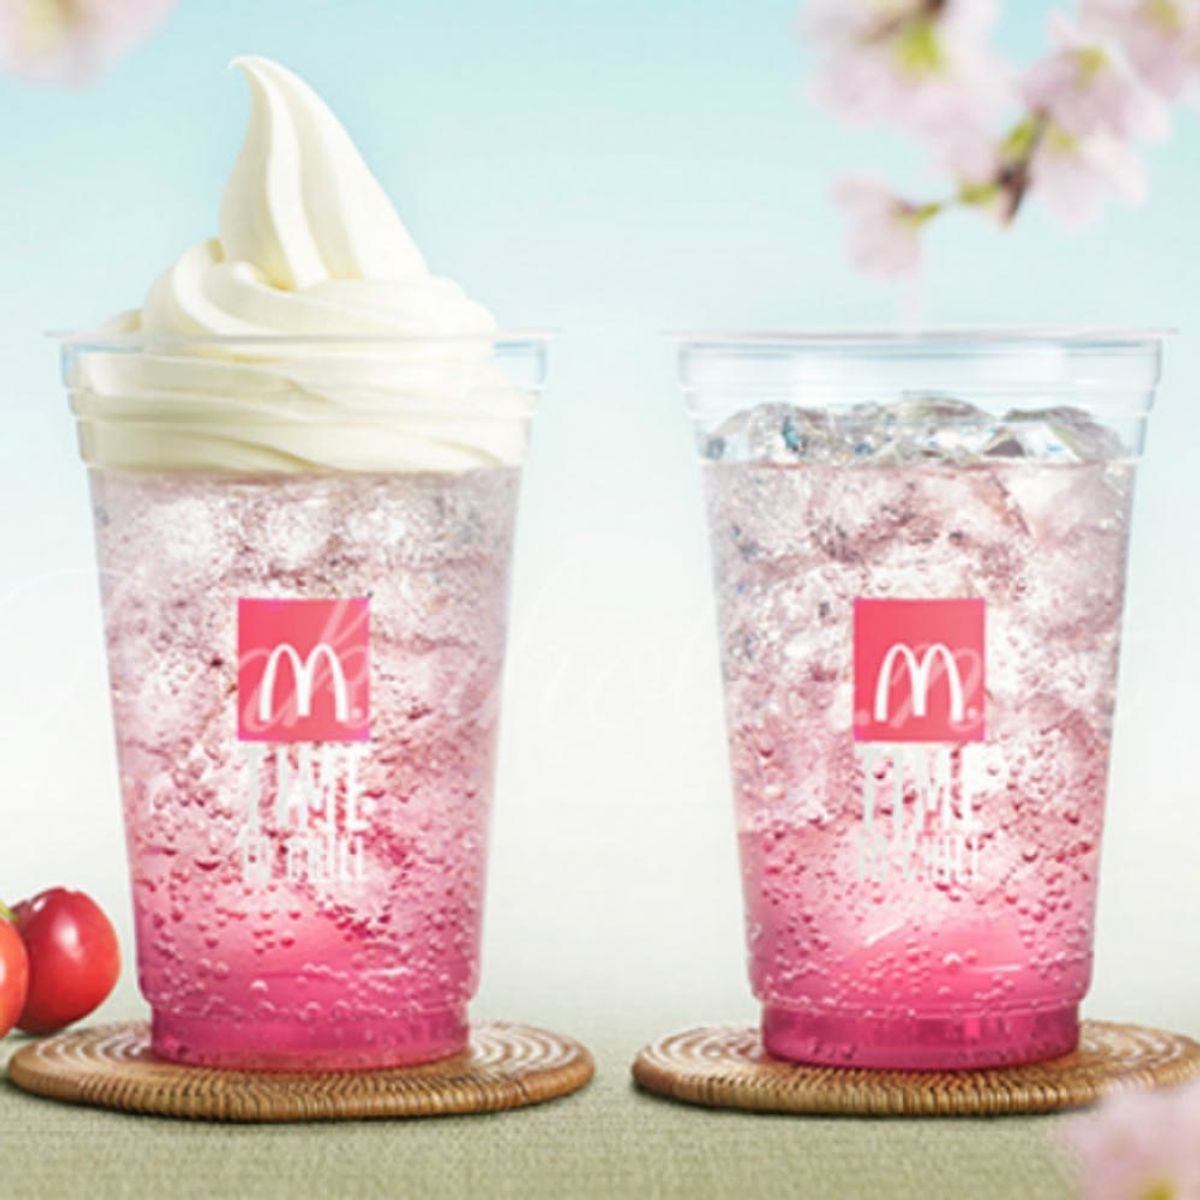 McDonald’s Just Launched Spring’s Most Instagram-Worthy Drink